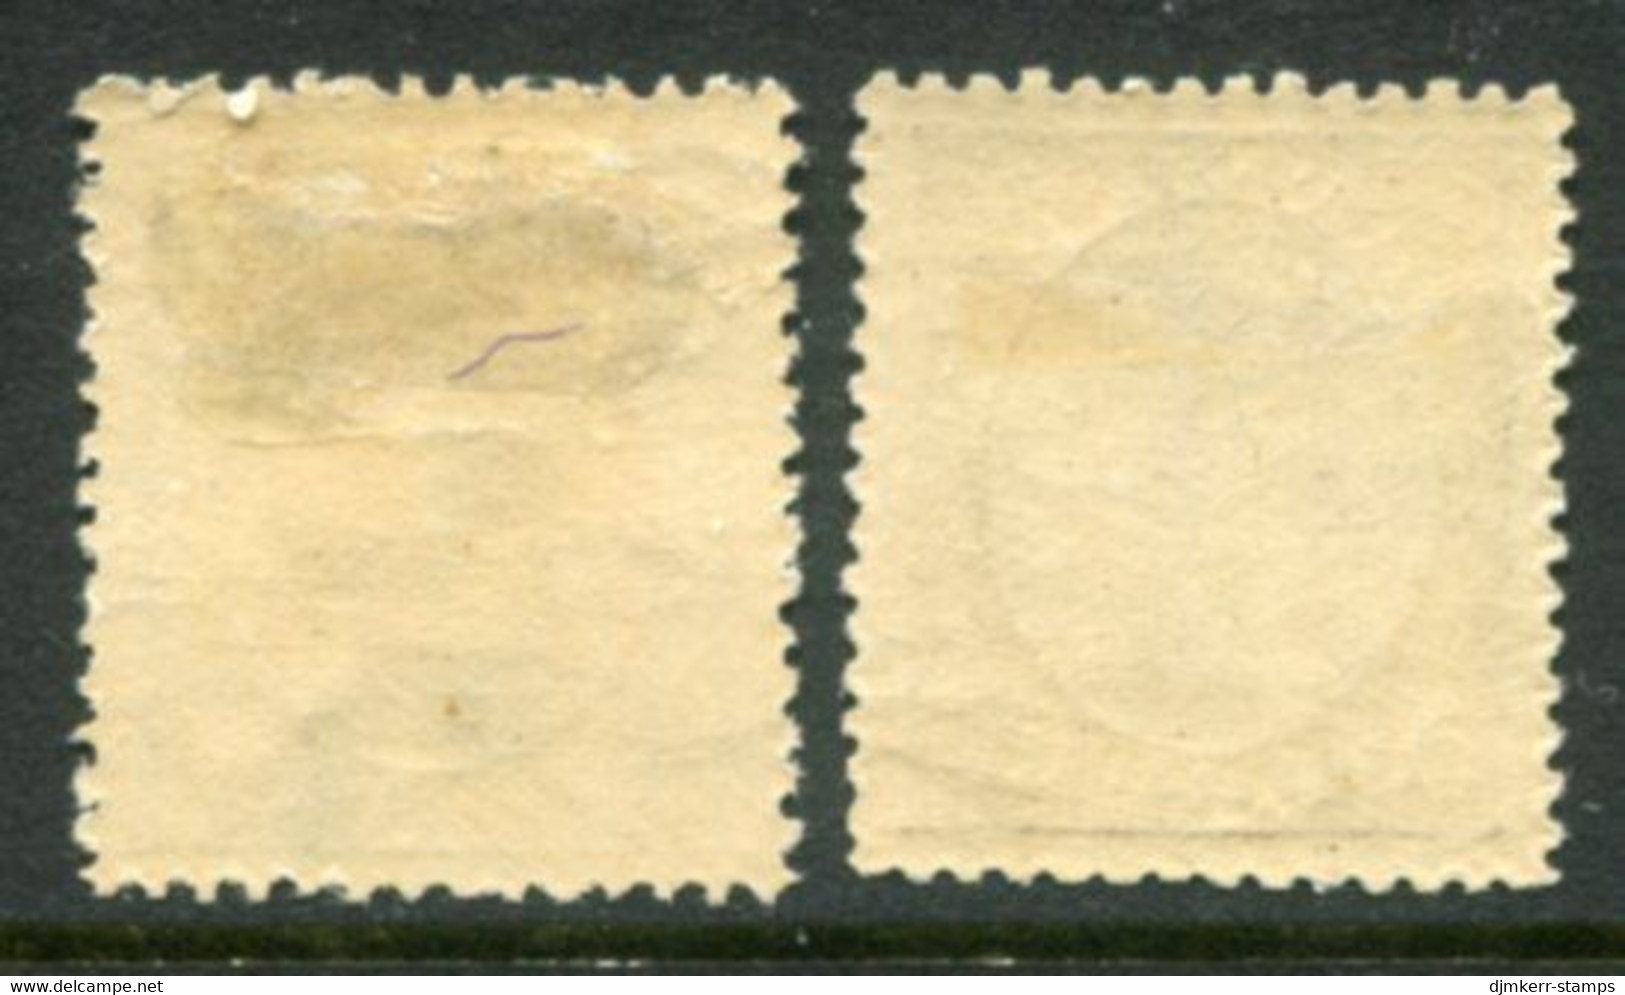 DENMARK 1919 King Christian X Definitive 60 Øre  Both Shades LHM / * .  Michel 106a-b; SG 161,161a - Unused Stamps